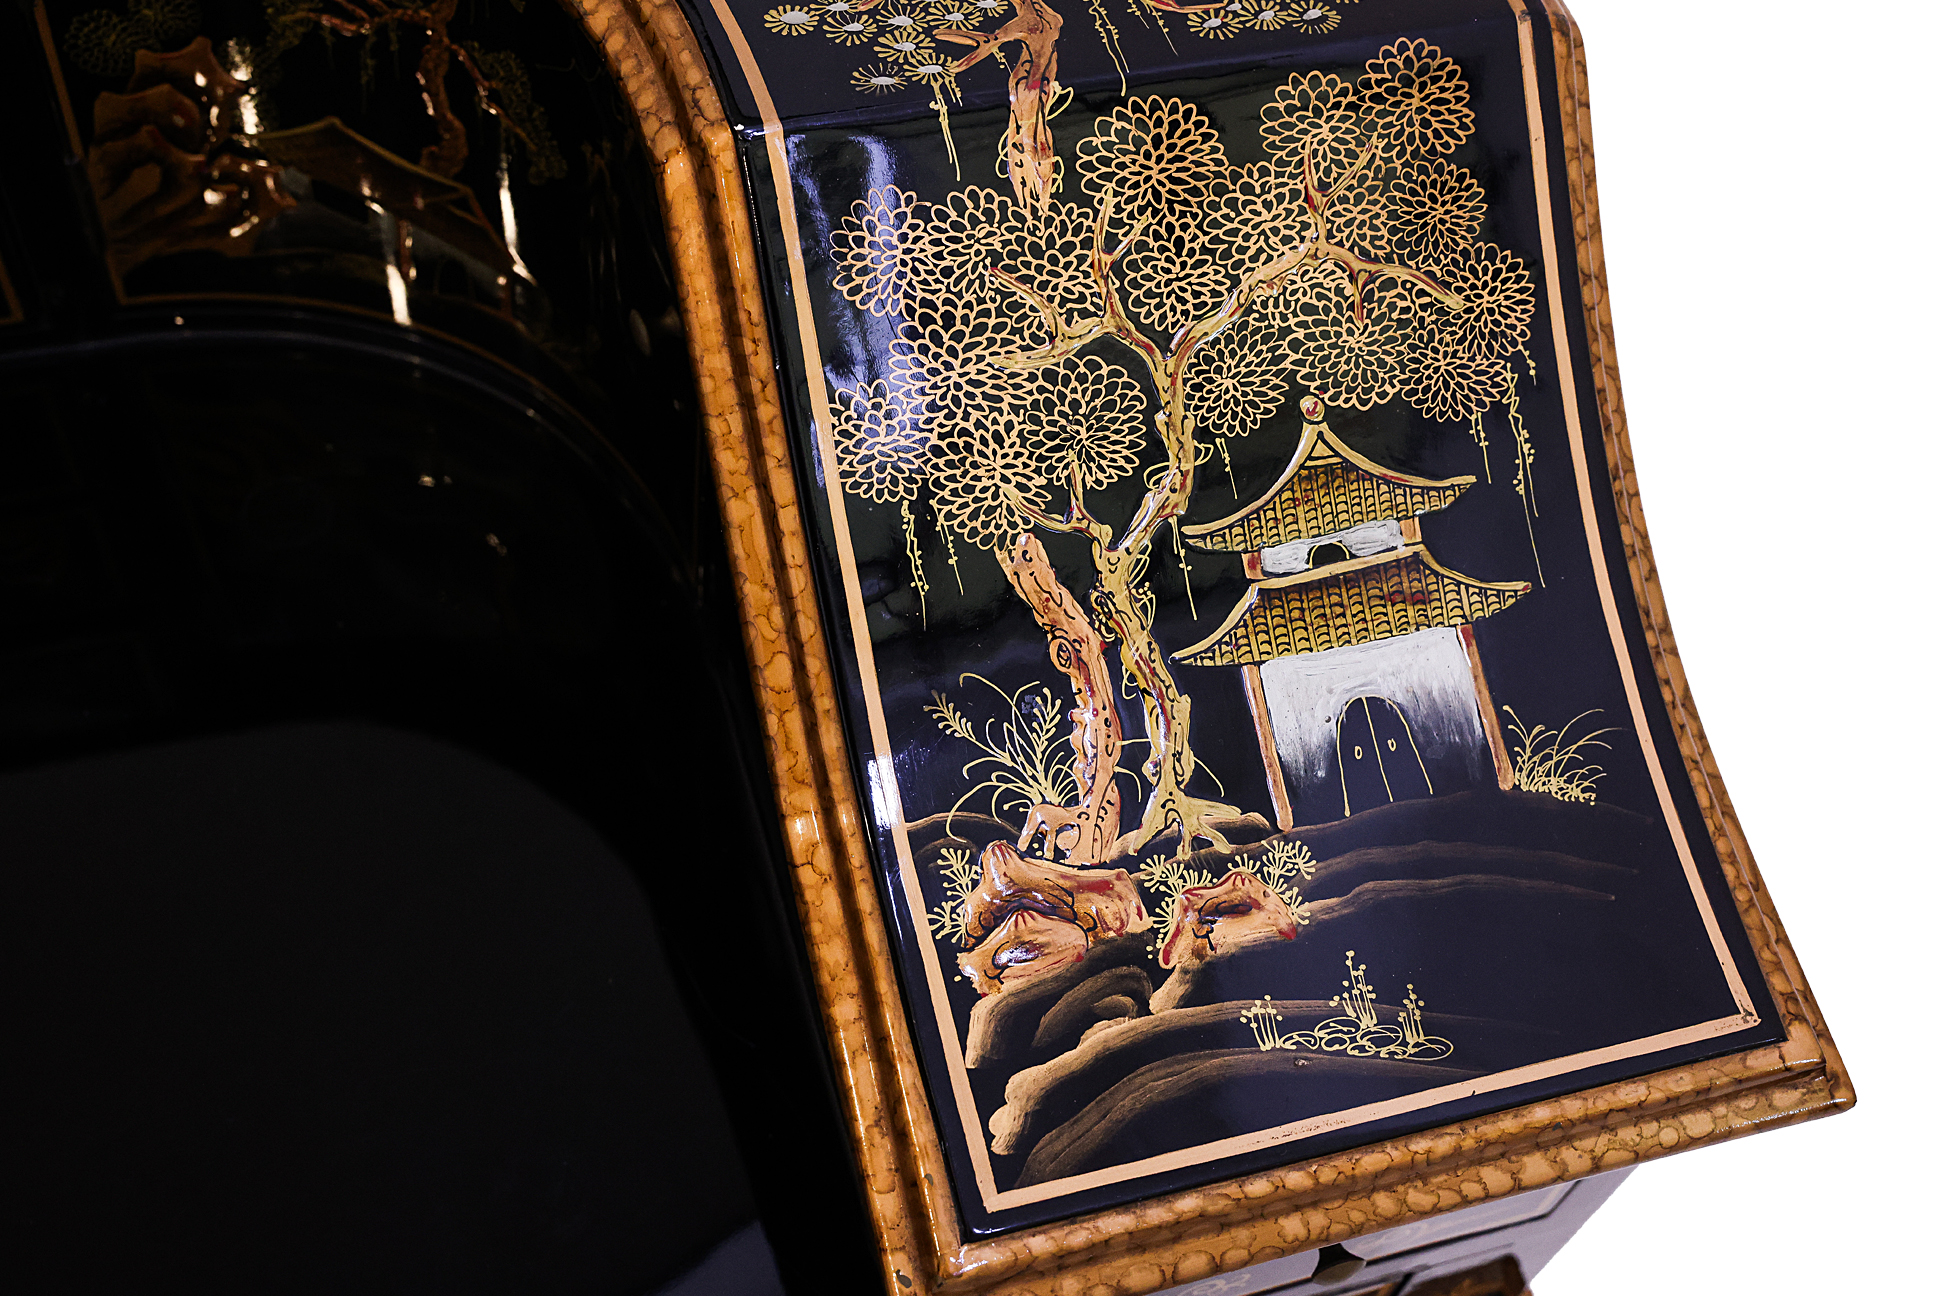 A MODERN CHINOISERIE CARLTON HOUSE DESK AND CHAIR - Image 4 of 8